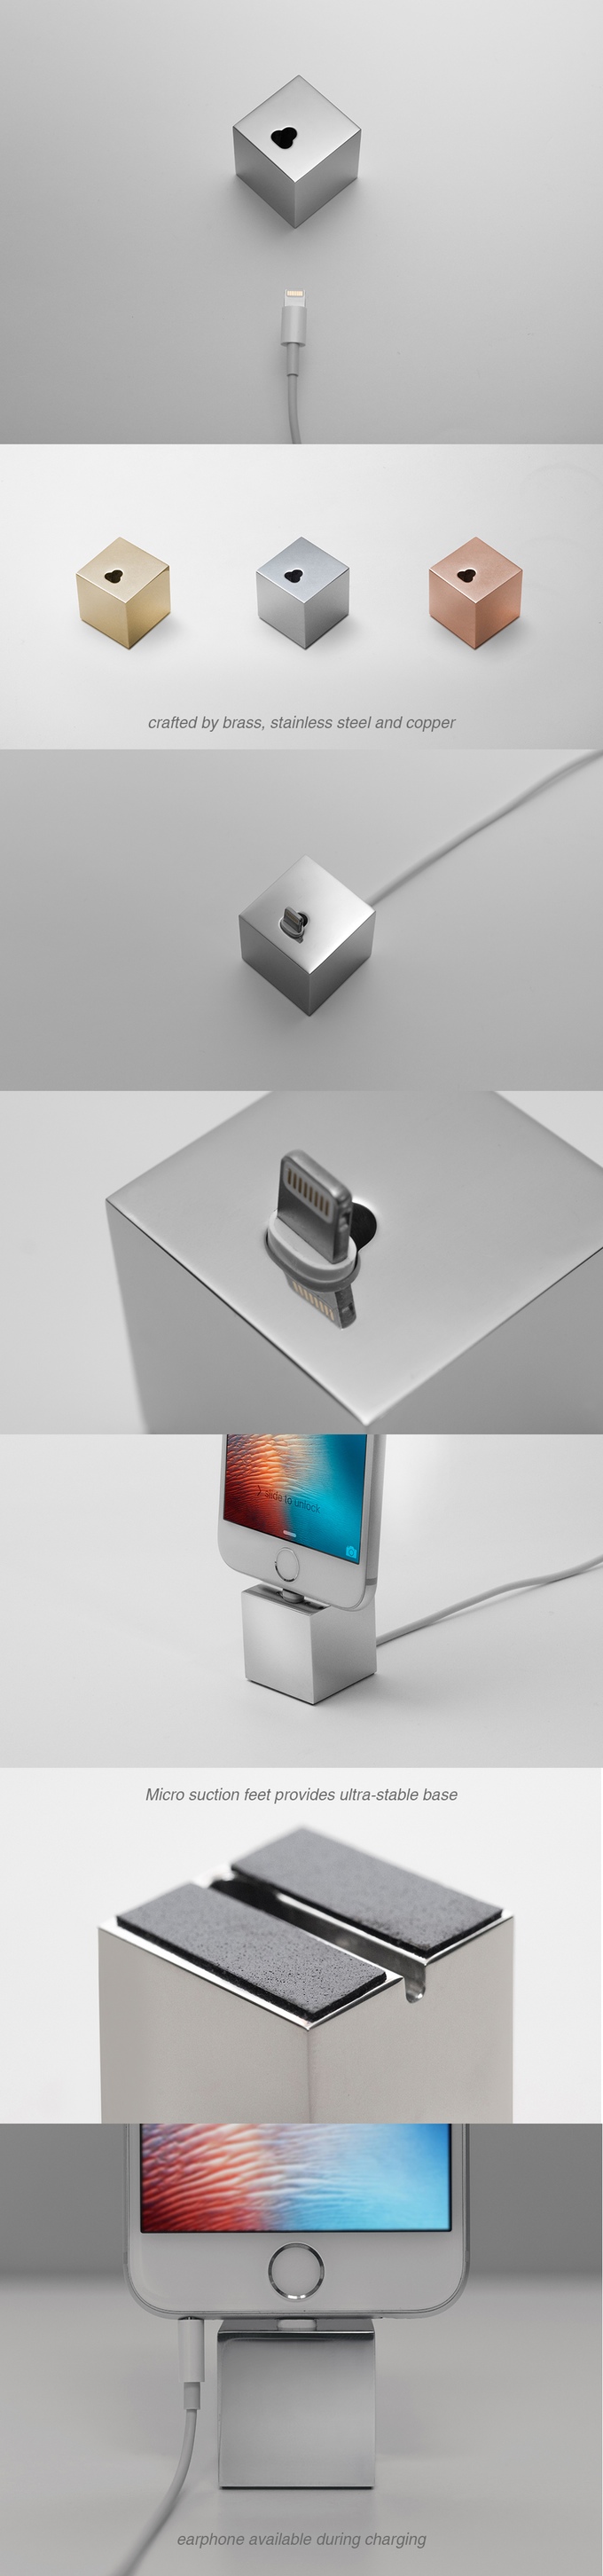 Q-Dock Charger